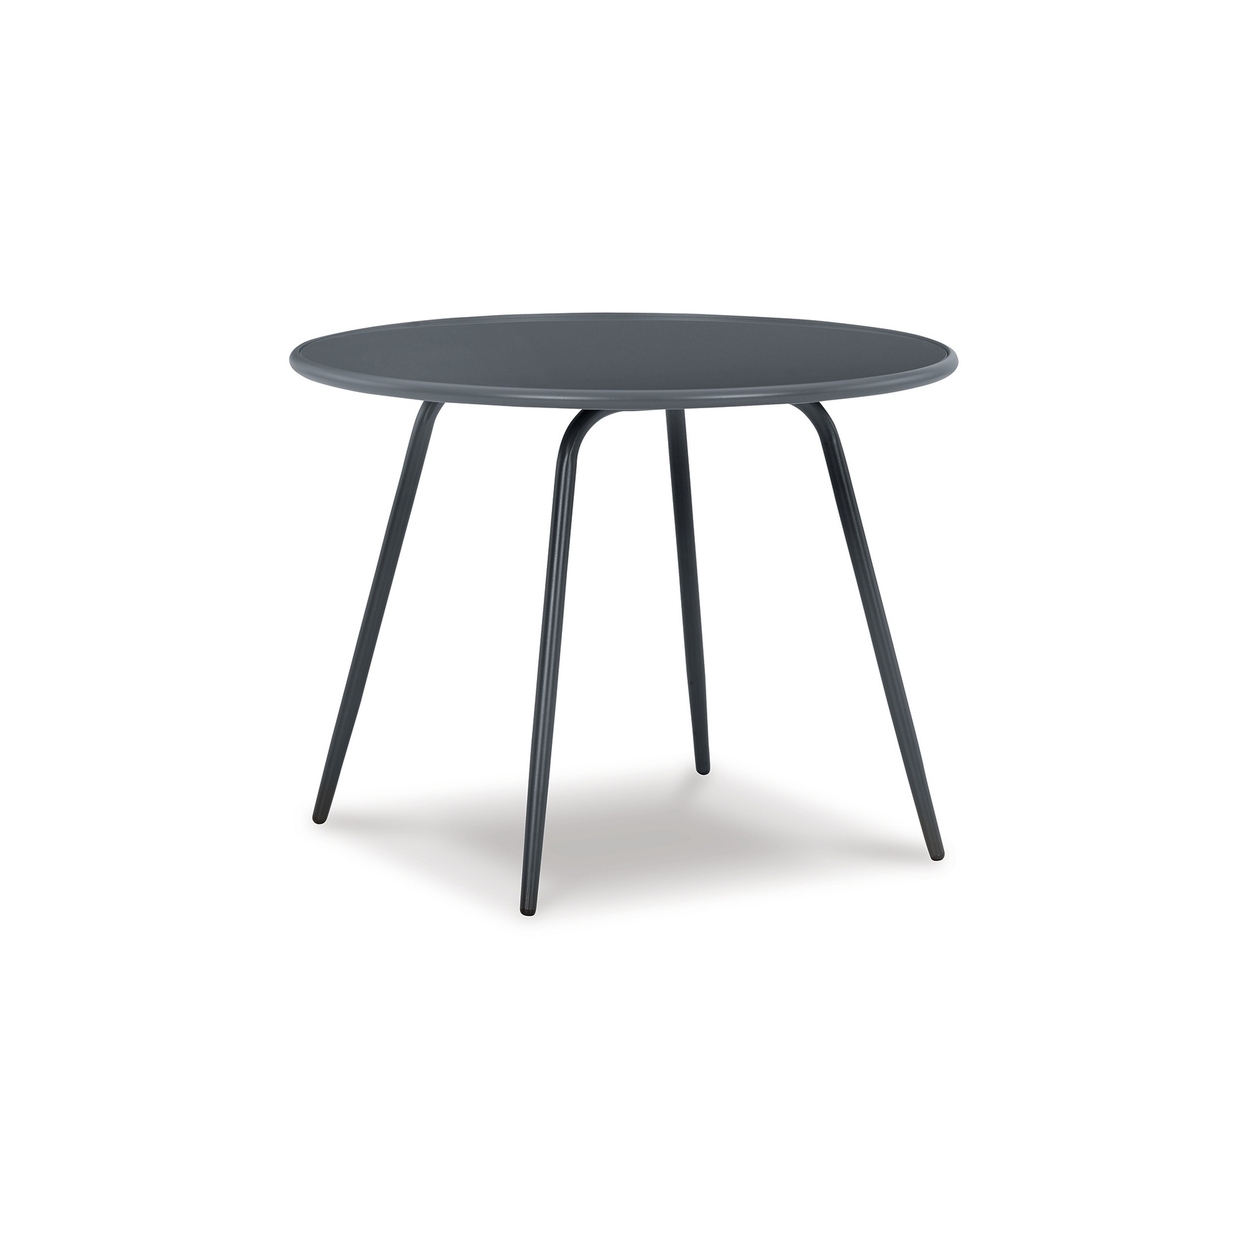 Plum 35 Inch Outdoor Dining Table, Round Glass Top, Gray Steel Frame - Saltoro Sherpi